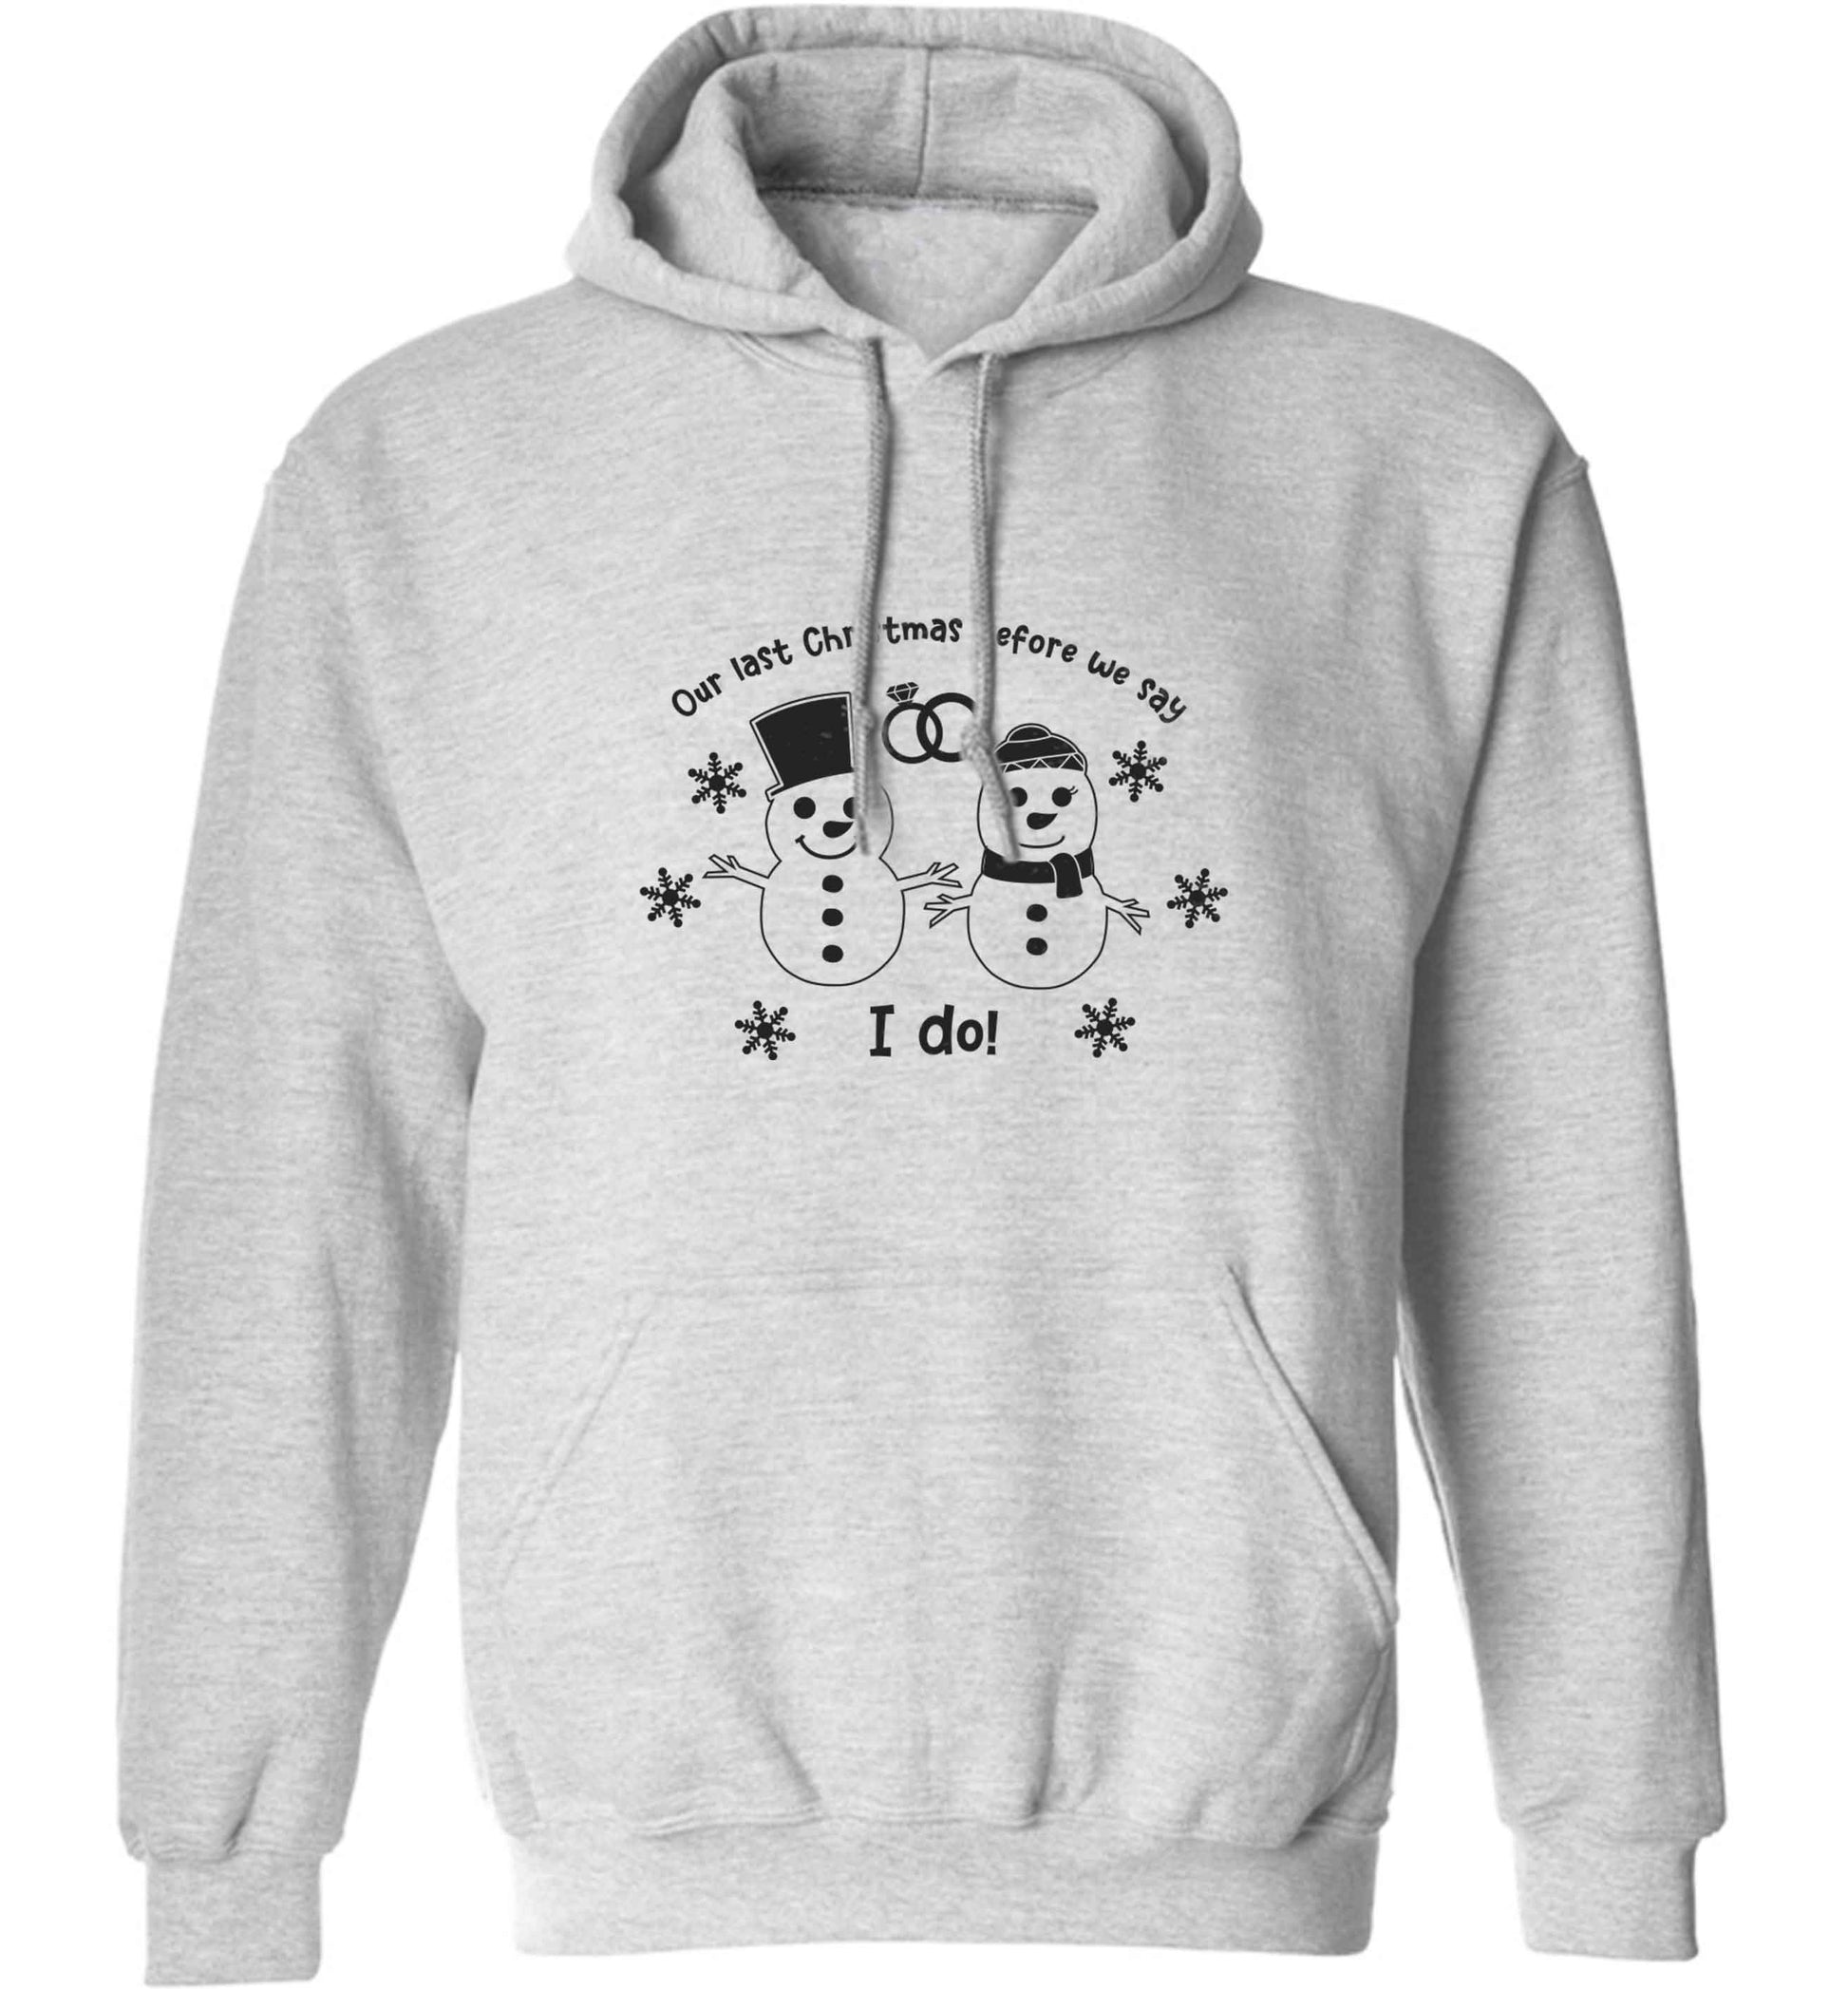 Last Christmas before we say I do adults unisex grey hoodie 2XL